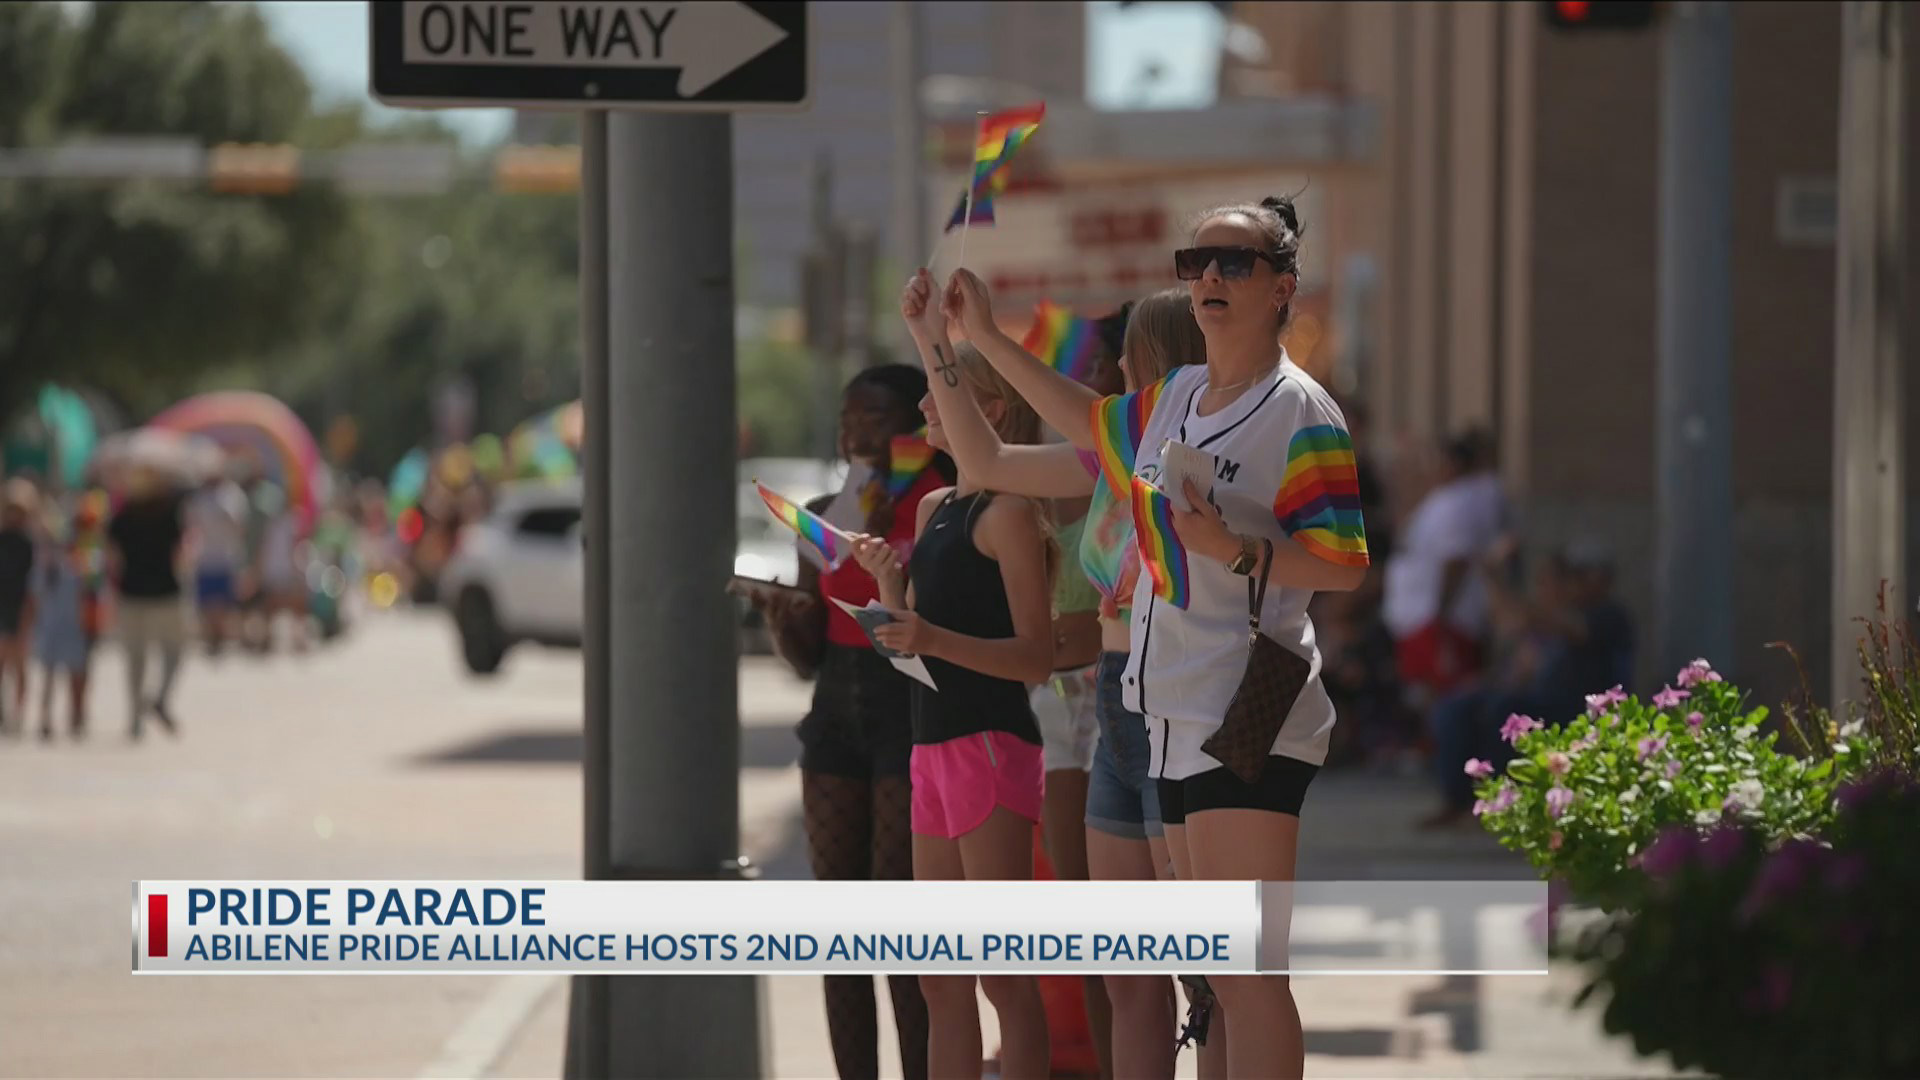 'Abilene is still full of a lot of love' Second annual pride parade